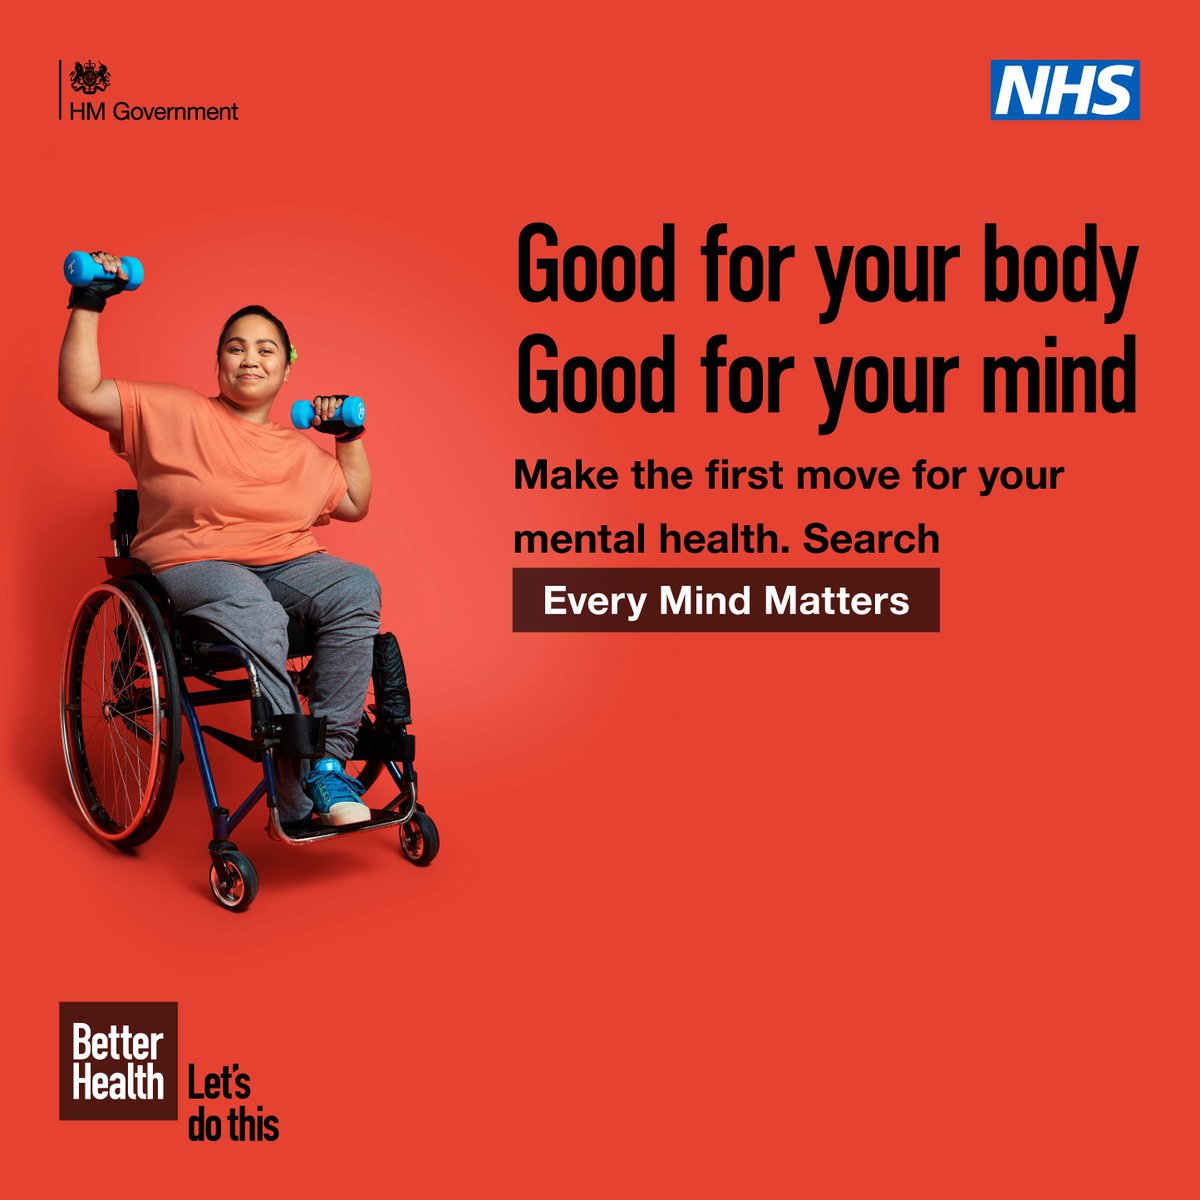 This #MentalHealthAwarenessWeek, move more and feel better. Getting active doesn't have to be a hassle. Doing little things every day to be more active can really lift your mood and put a smile on your face! 👉 nhs.uk/every-mind-mat…